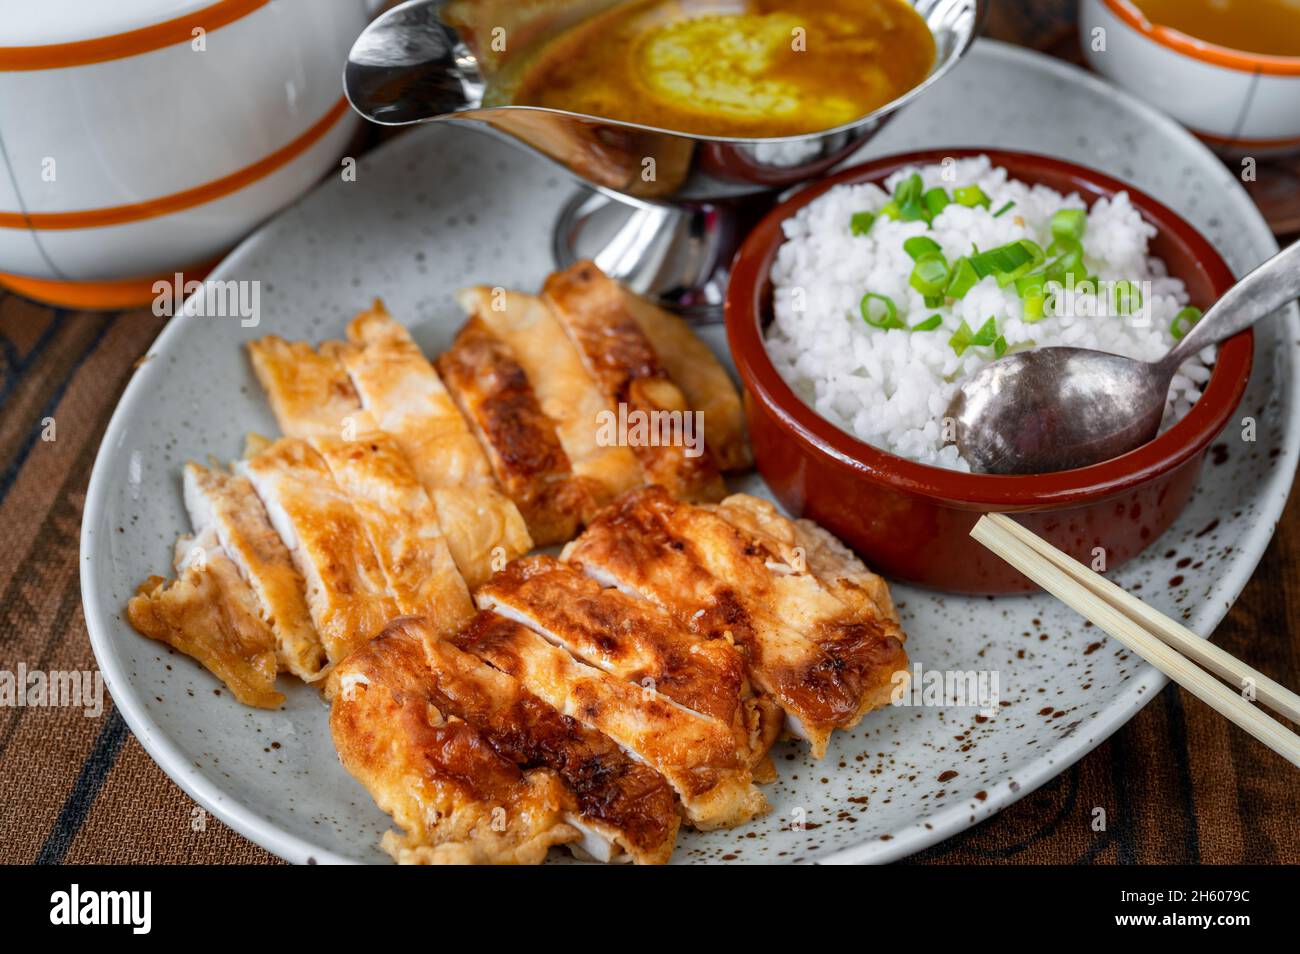 Sliced chicken meat fried in crispy panko bread crumb, rice in bowl, chopstick, spicy curry sauce in sauce boat, tea on table. Asian meal. Stock Photo